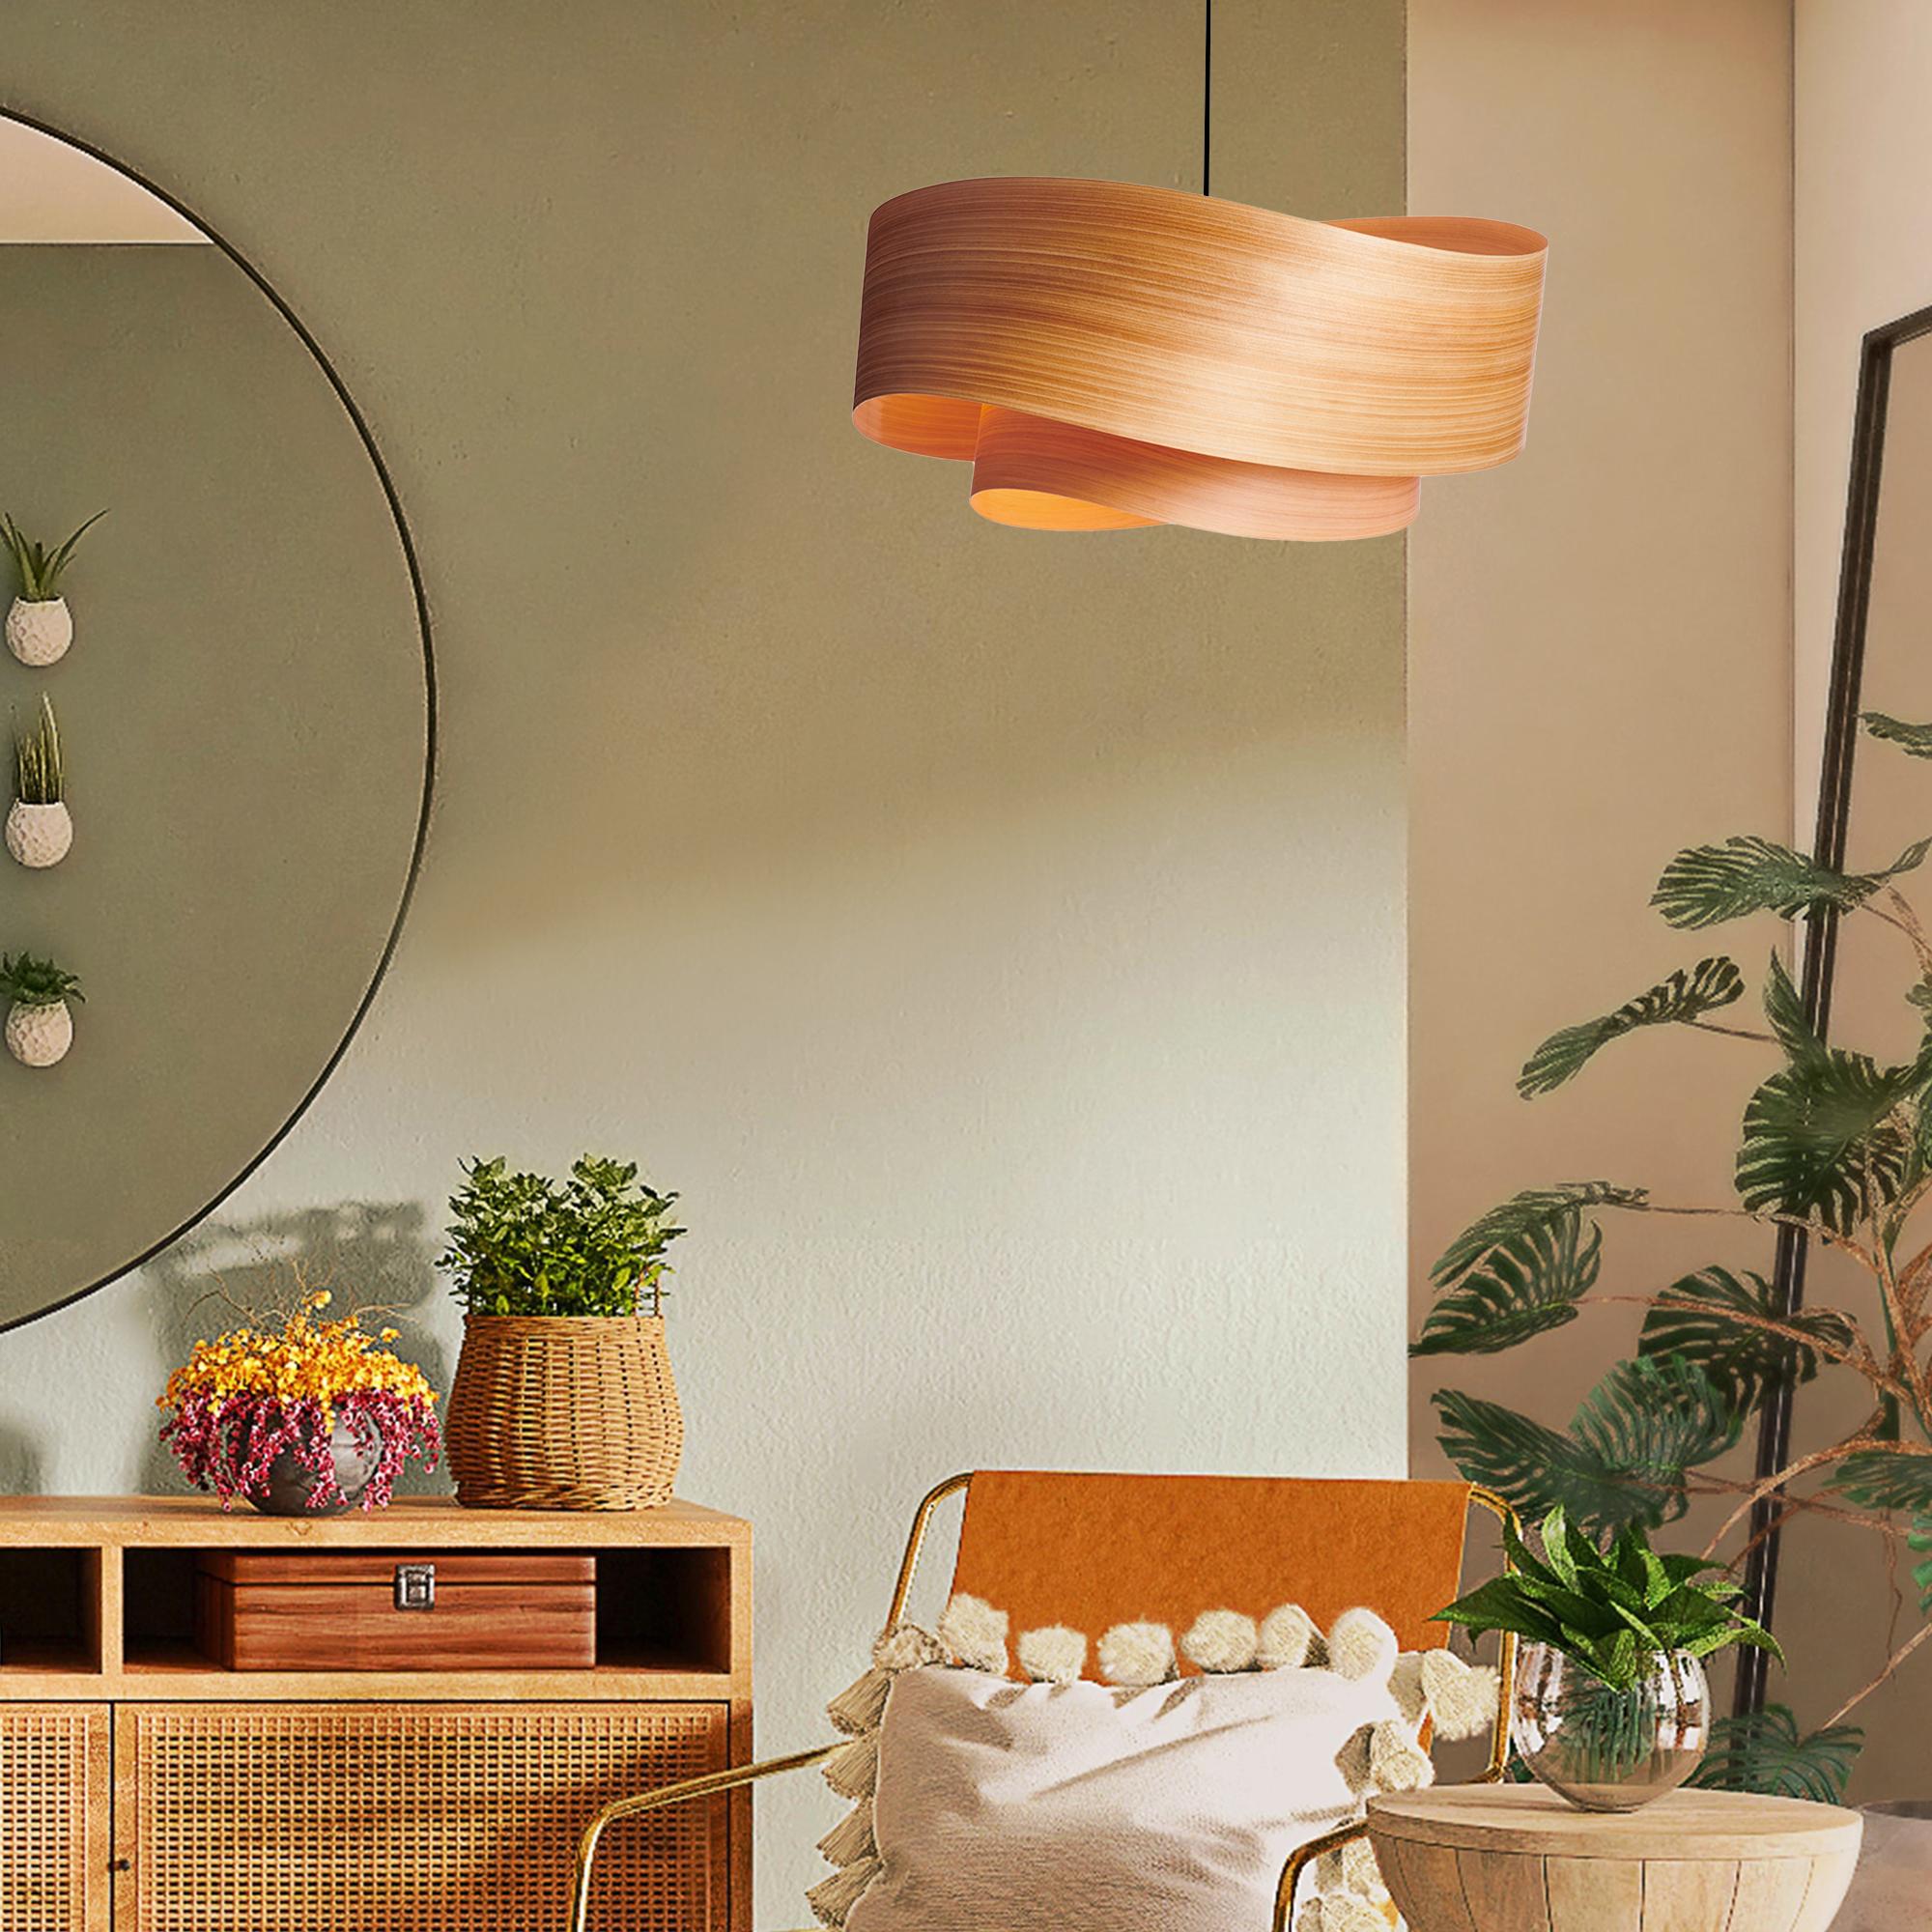 Limited-Edition Mid-Century Modern Cypress Veneer Pendant Light: A Natural Masterpiece

Bring the beauty of nature indoors with this stunning, limited-edition mid-century modern cypress veneer pendant light. Handcrafted from the finest cypress